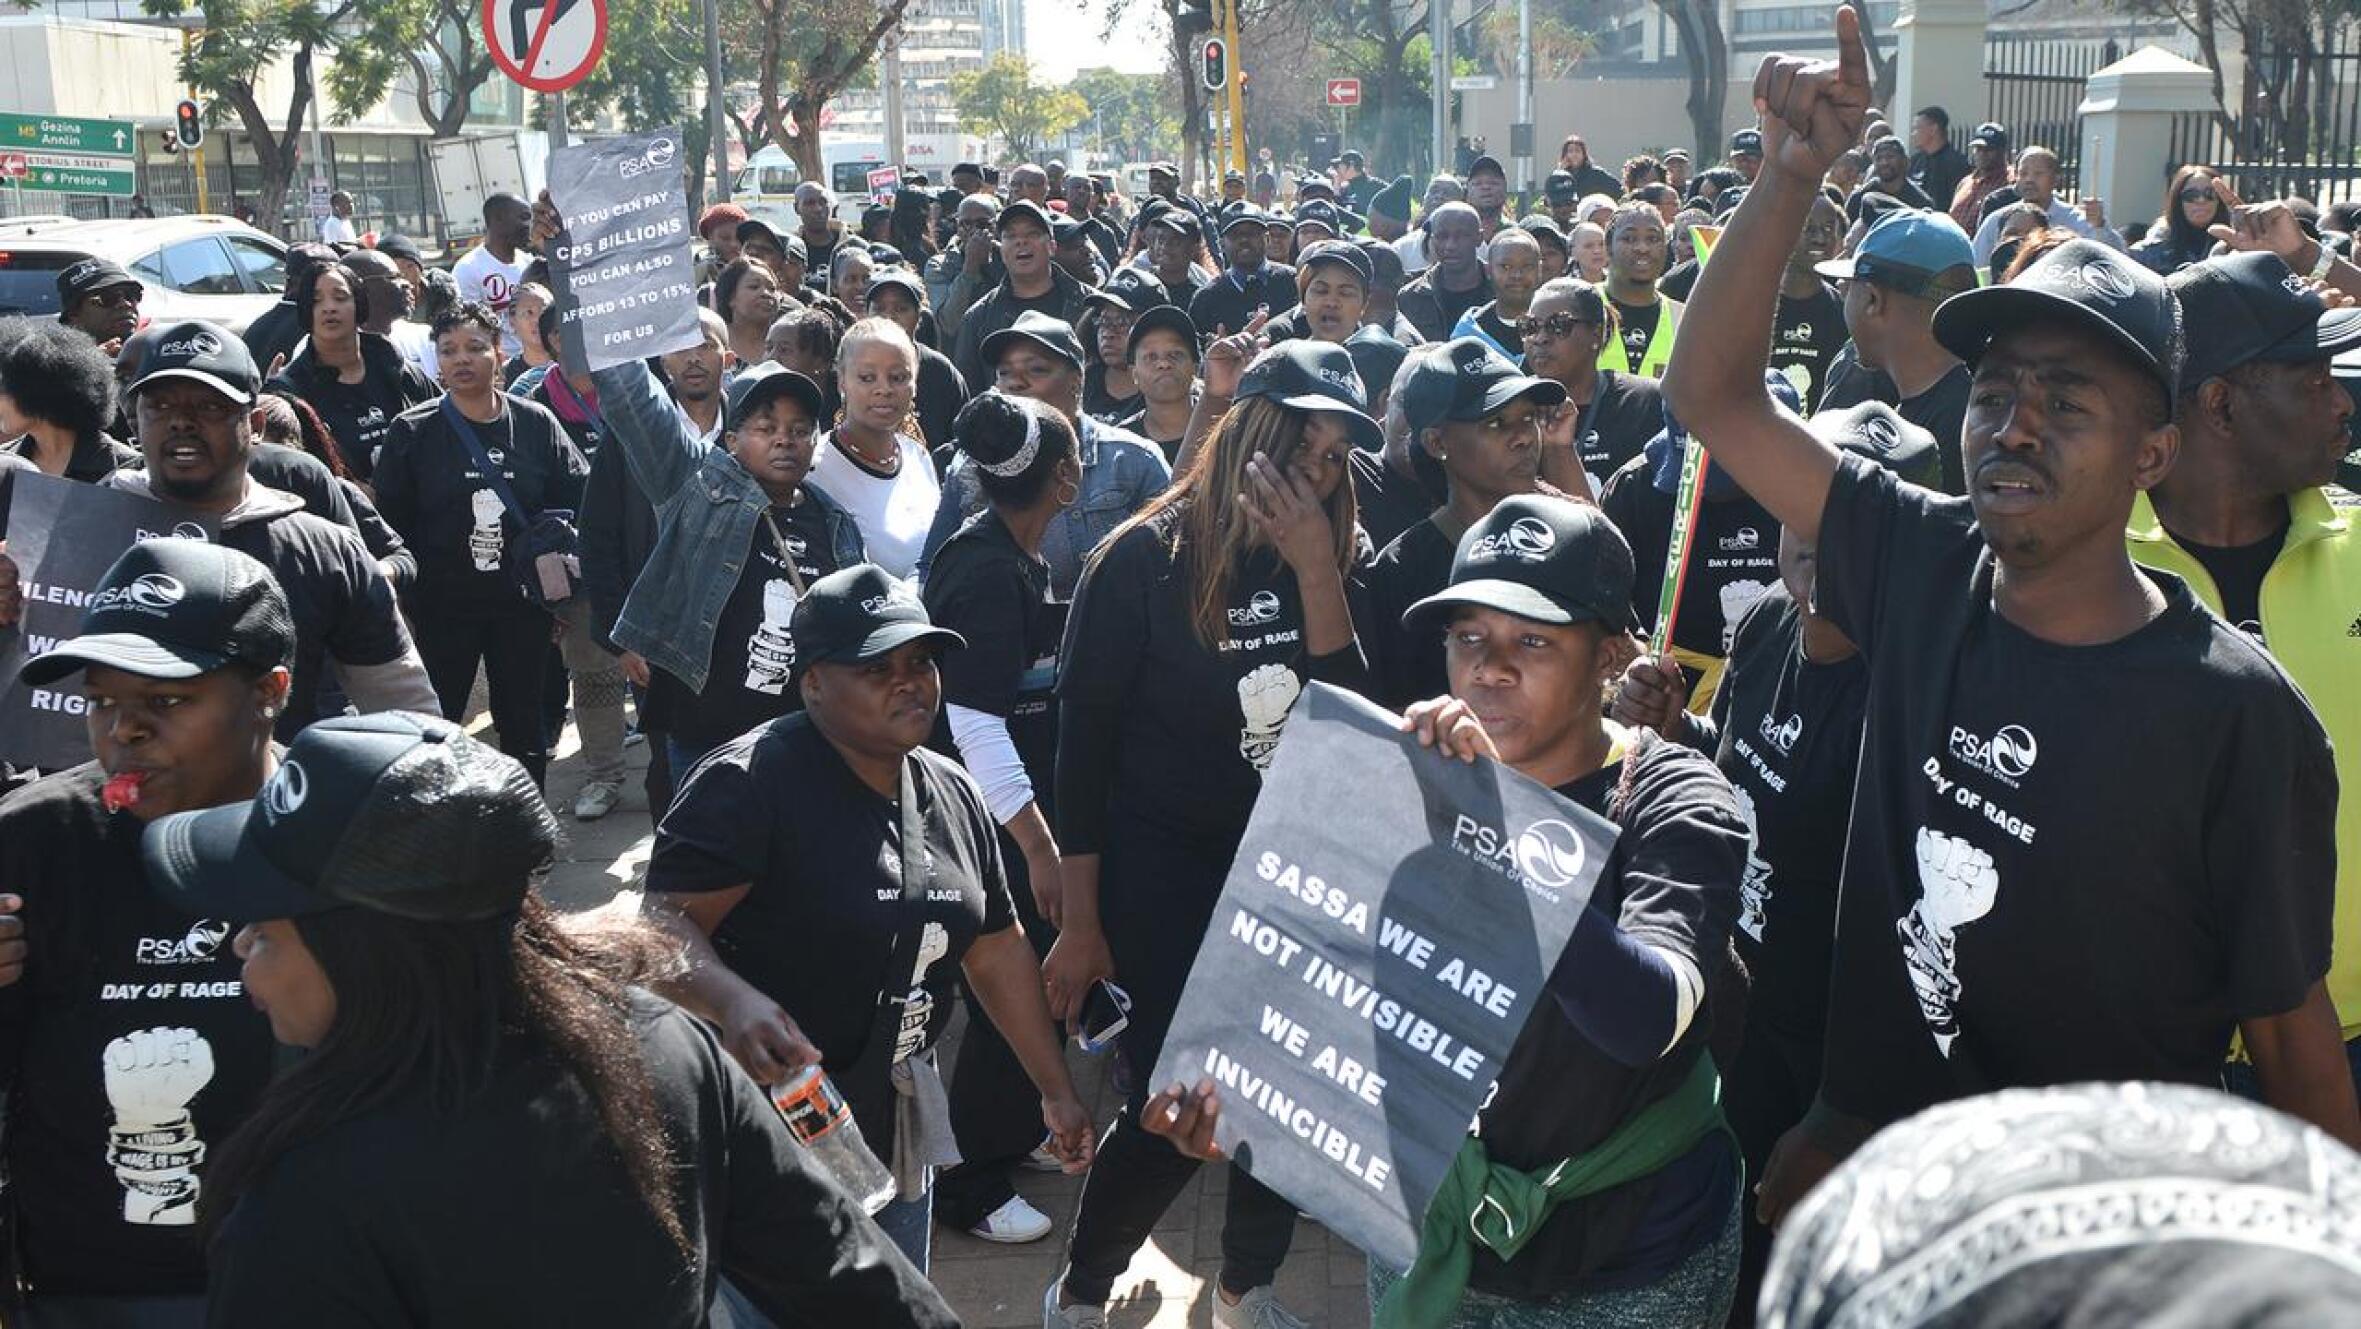 Union members dressed in black hold up posters during a protest.